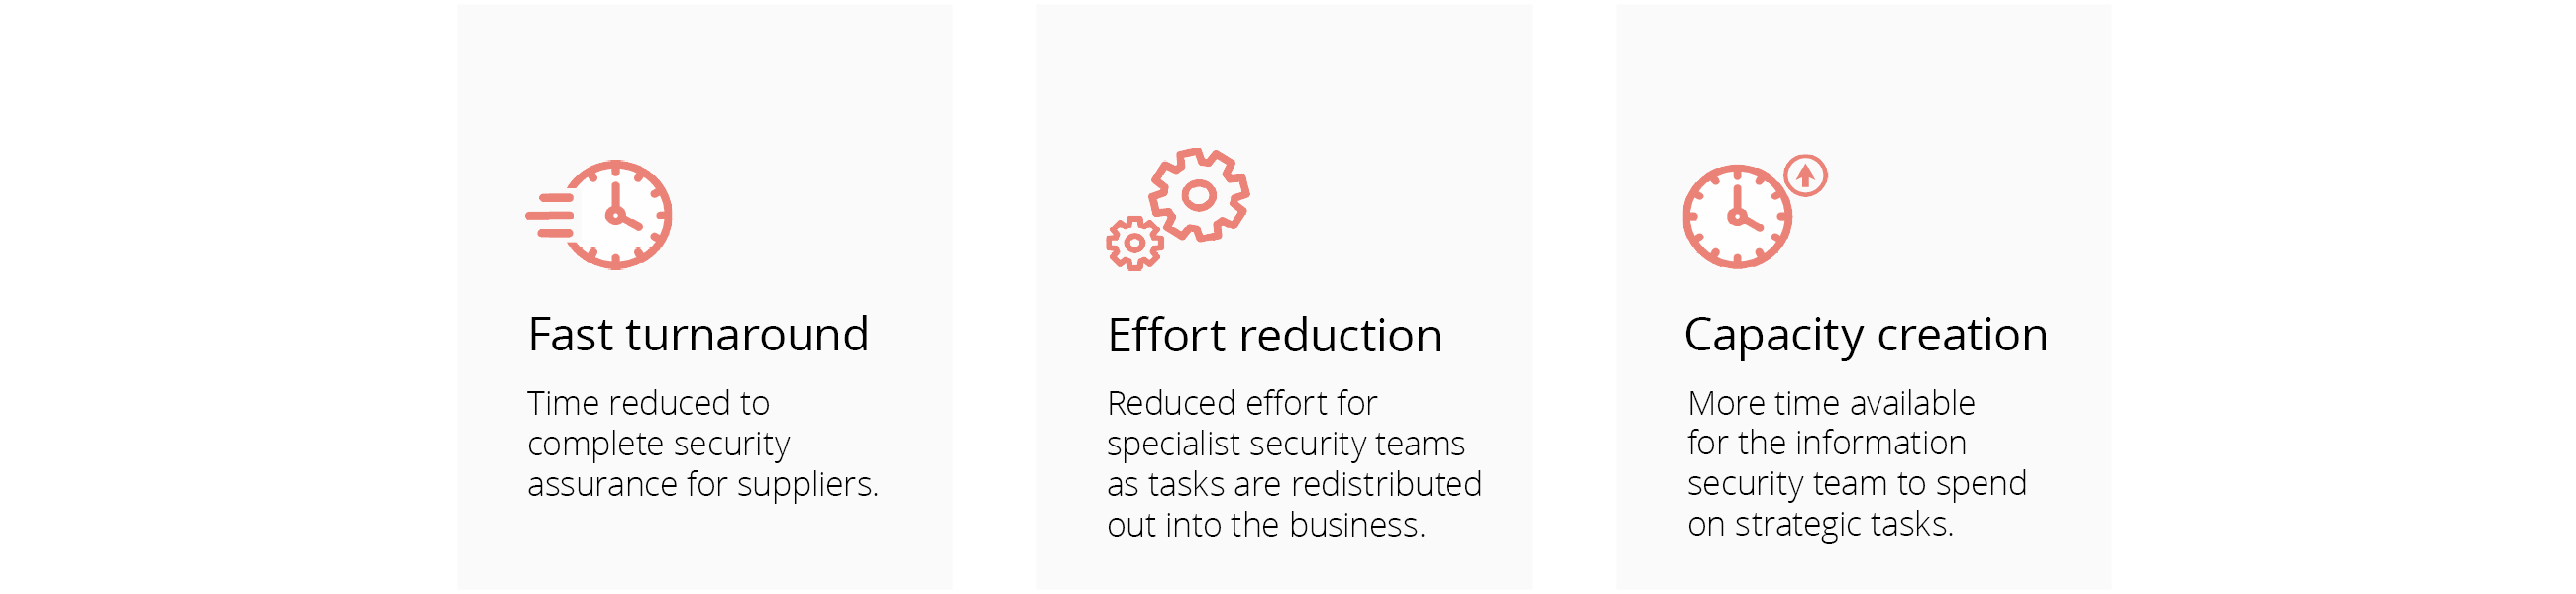 Fast turnaround - time reduced to complete security Effort reduction - reduced effort for specialist security teams as tasks are redistributed out into the business Capacity creation - more time available for the information security team to spend on strategic tasks